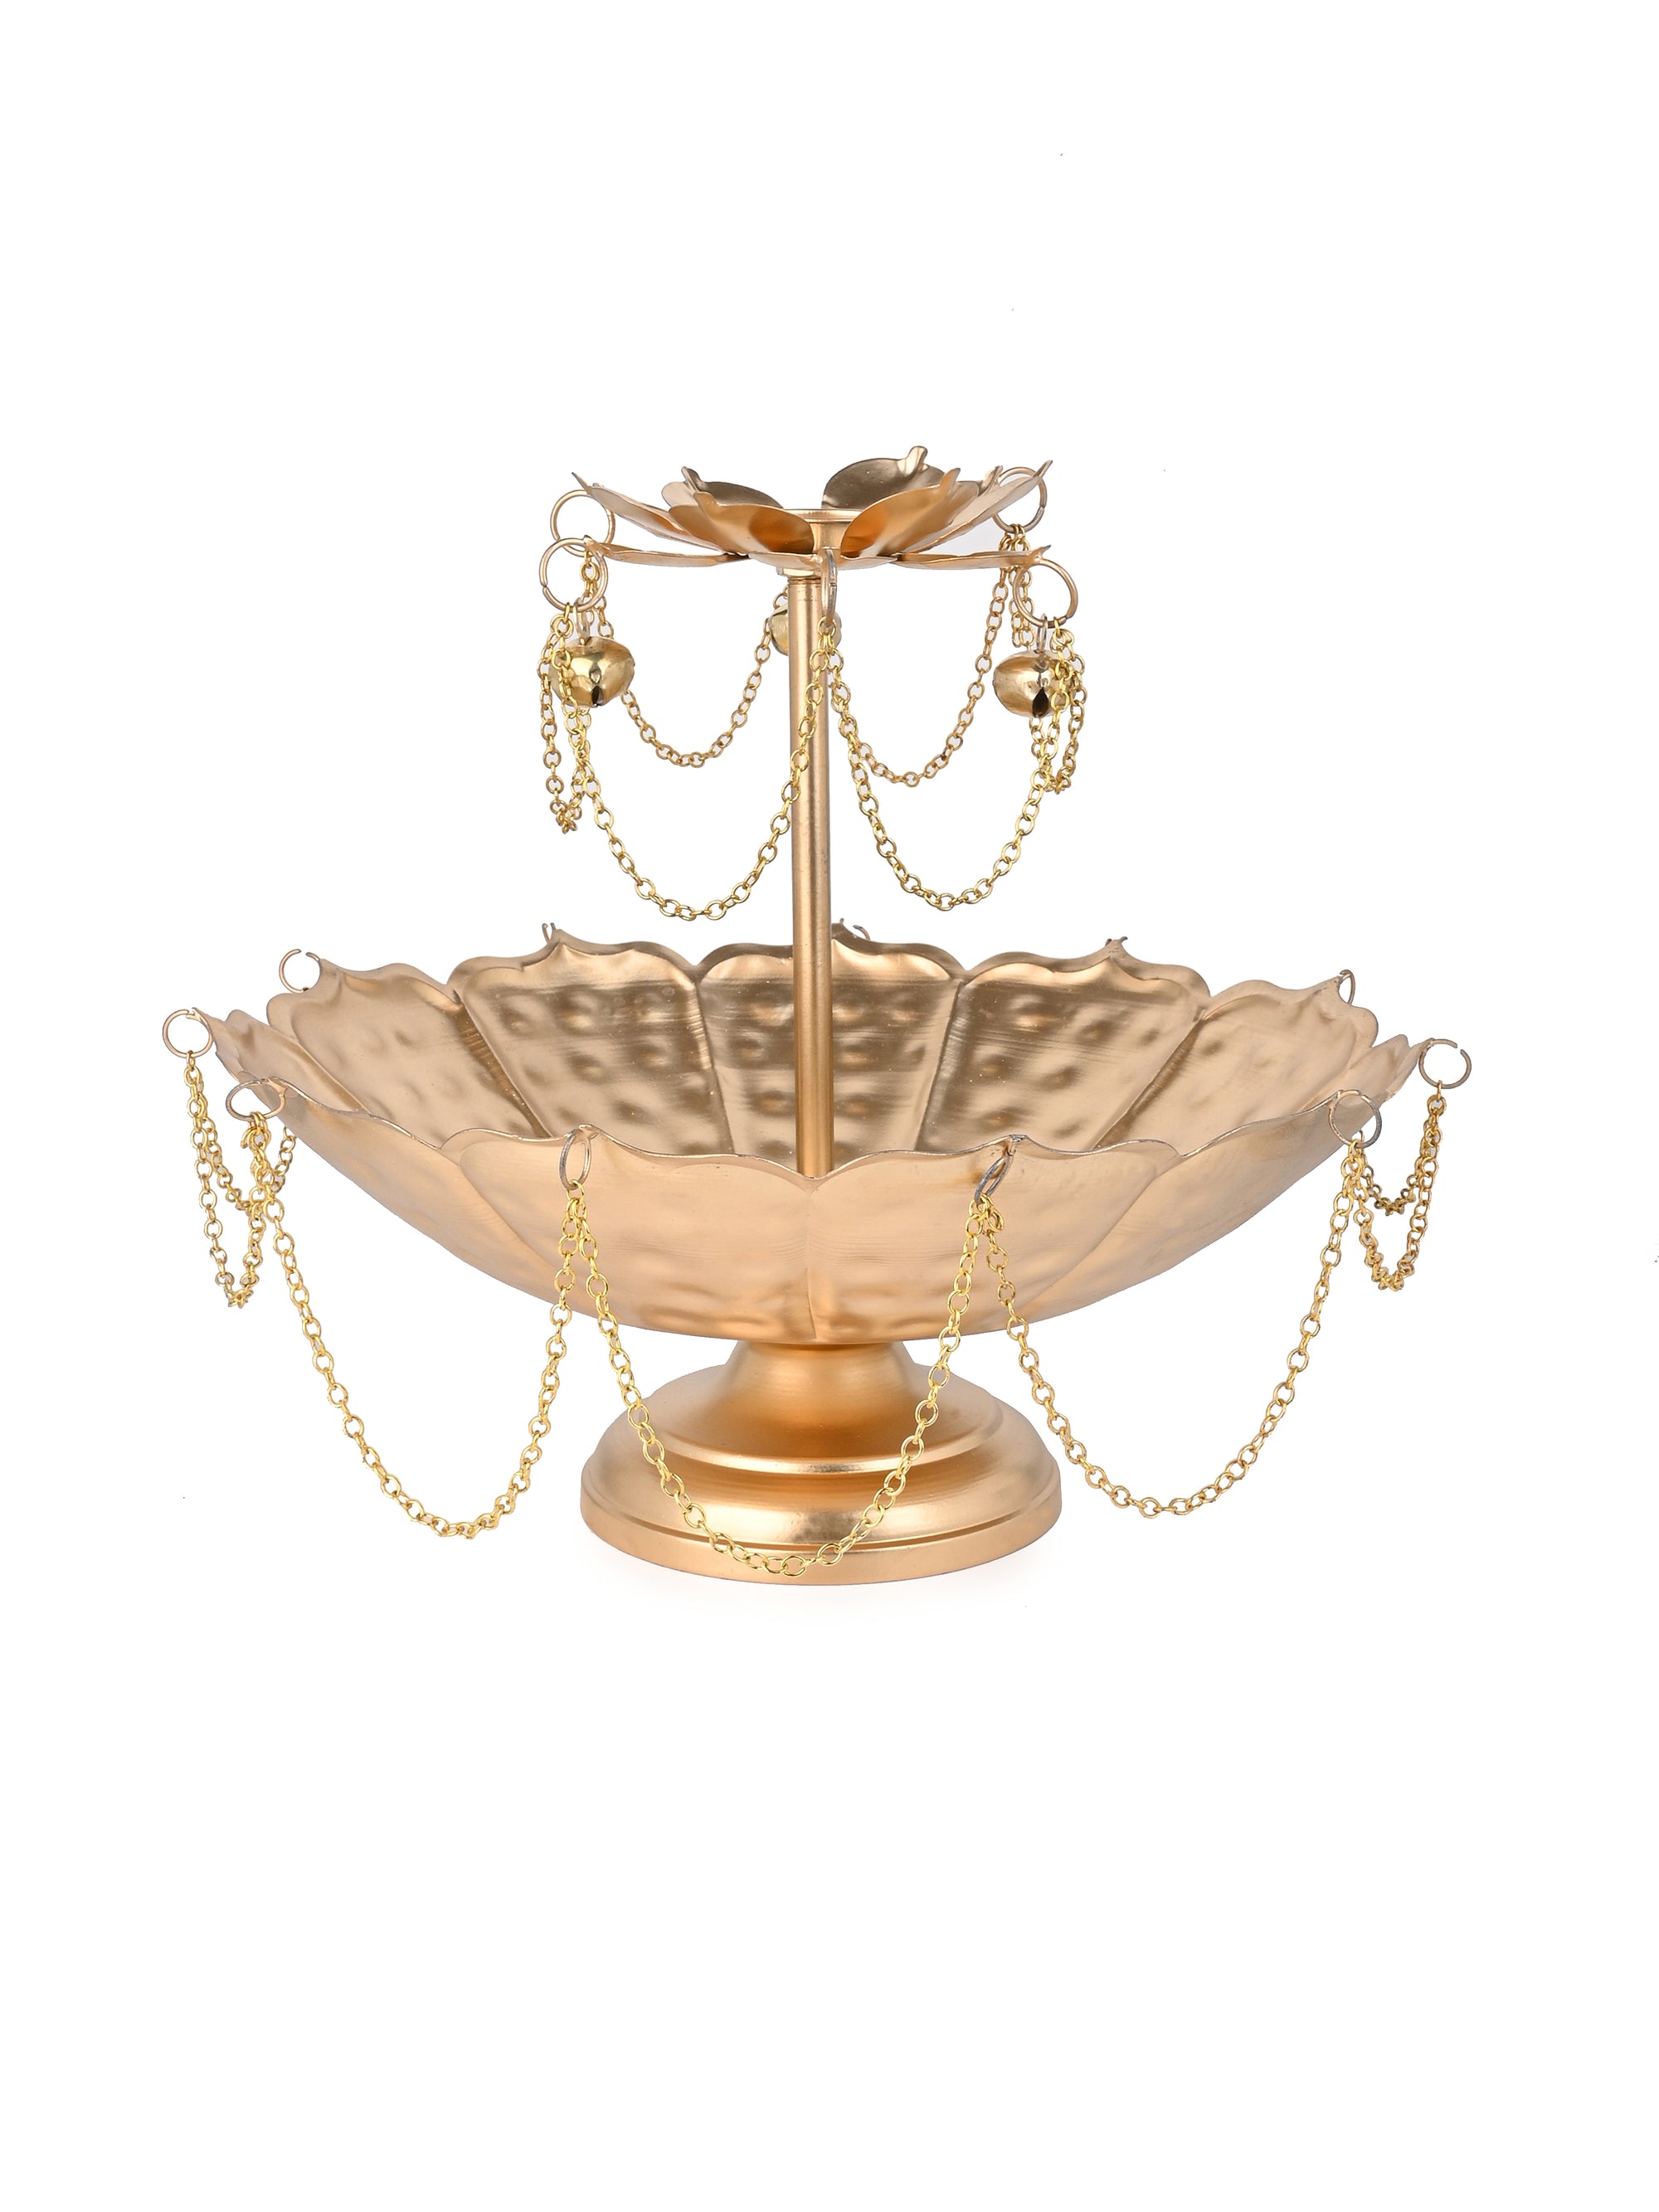 2 Tier Chain Design Urli with Candle Stand for Puja Rituals and Festive Occasions